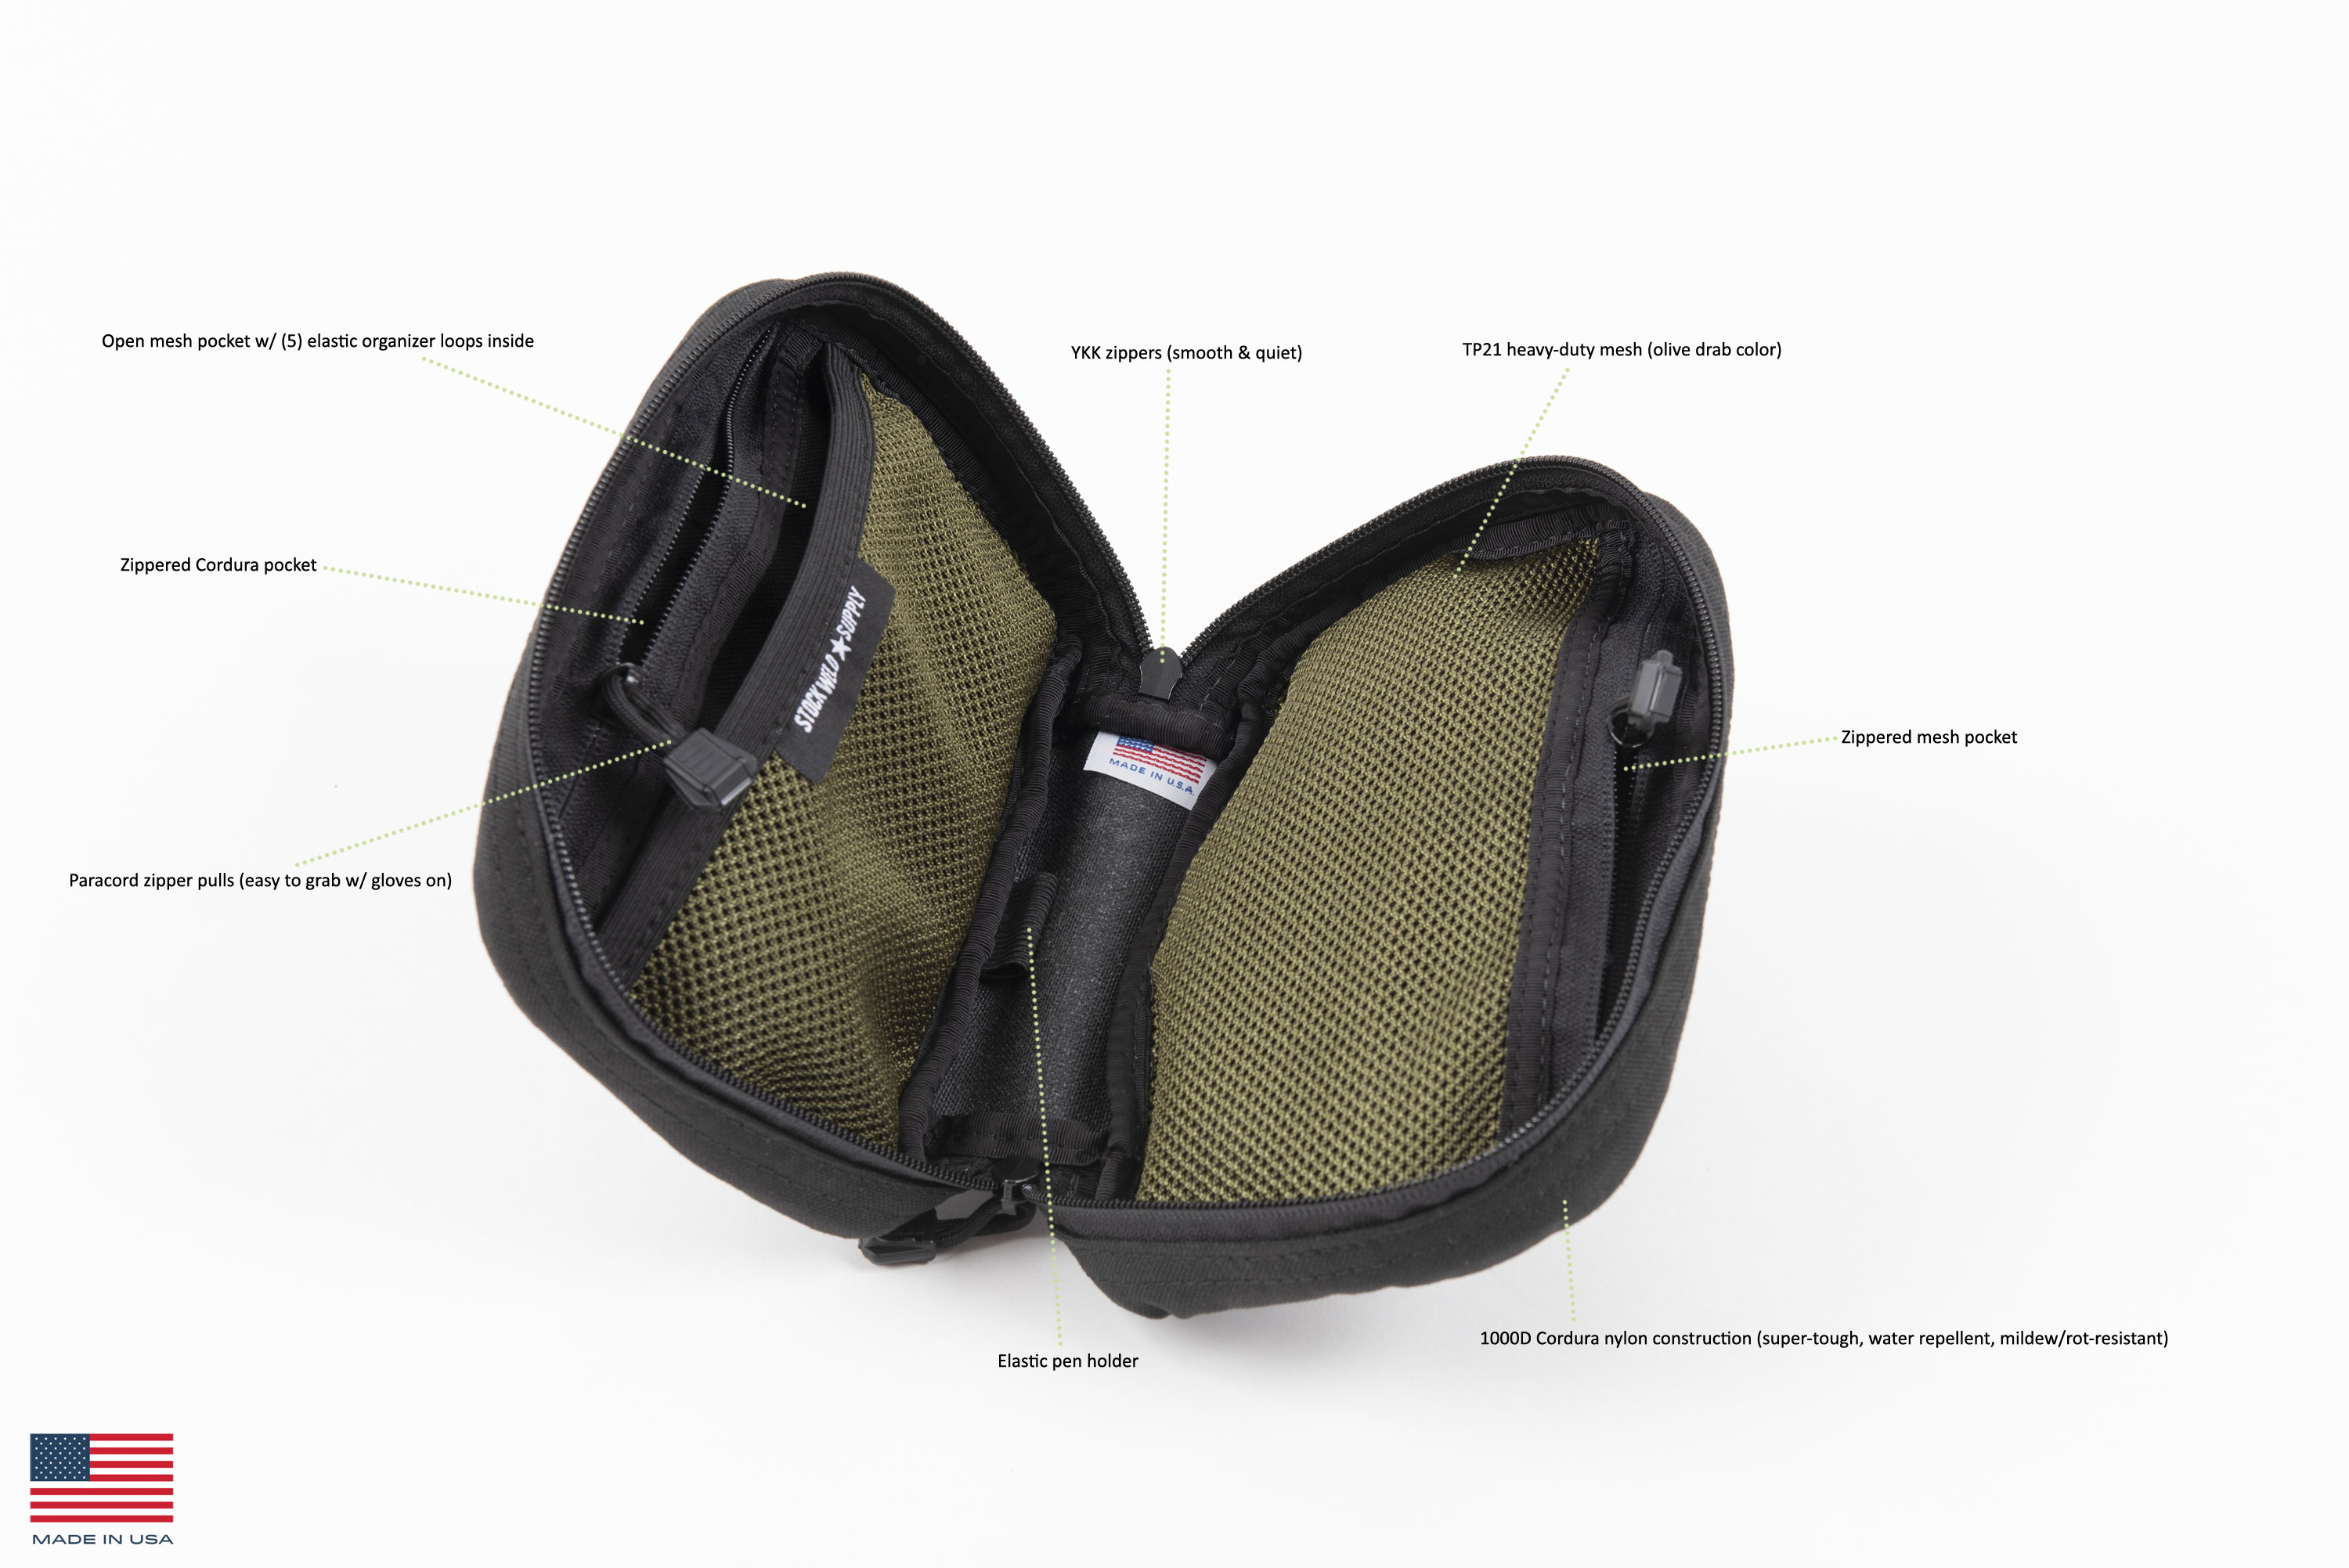 Tactical MOLLE Pouch - Made in USA - Dopp Kit, IFAK - Stockweld Supply